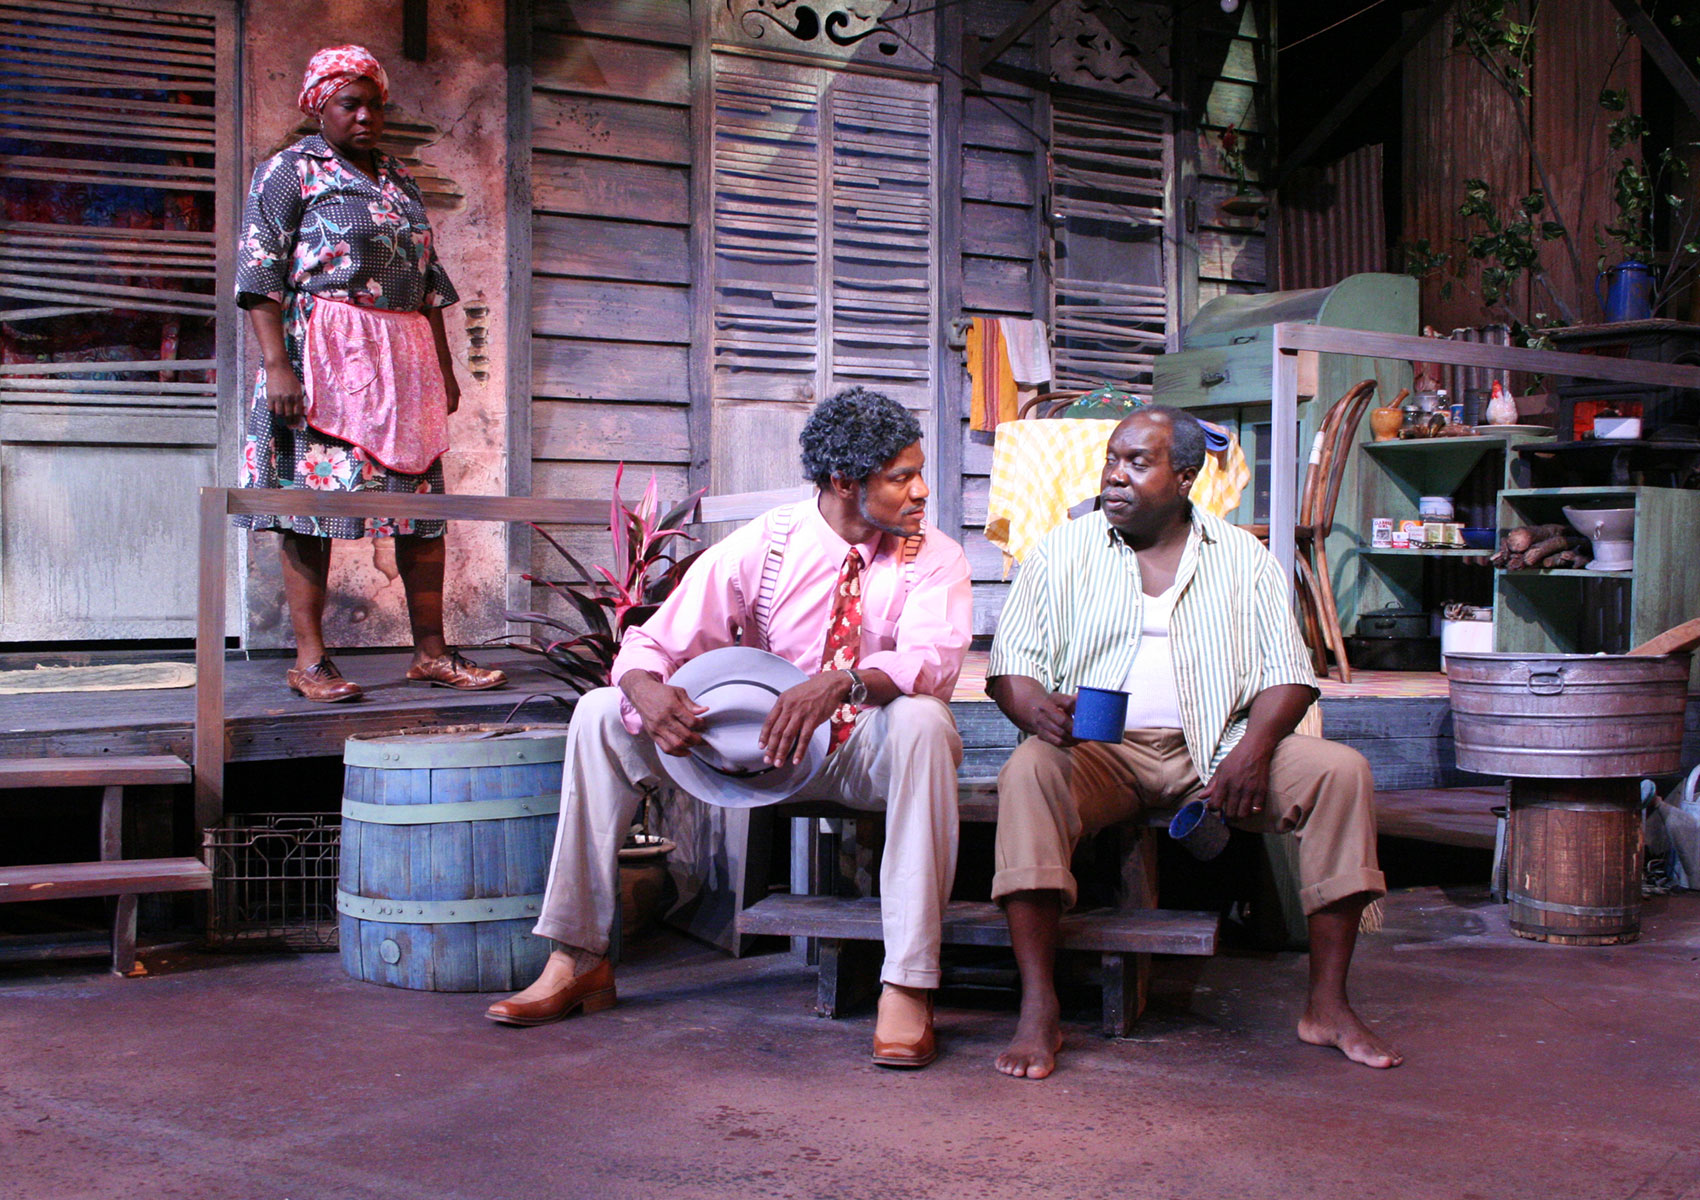 Two men sit on porch steps with their legs slightly spread as they are positioned in conversation with each other. The man on the left holds a hat in both hand and is leaning toward the man on the right, who is holding a coffee mug in each hand (one arm slackened while the other is being held as if ready the mug is about to be drank from) and is looking as if he is speaking. An older woman is watching them with her brow slightly furrowed from on the porch. 